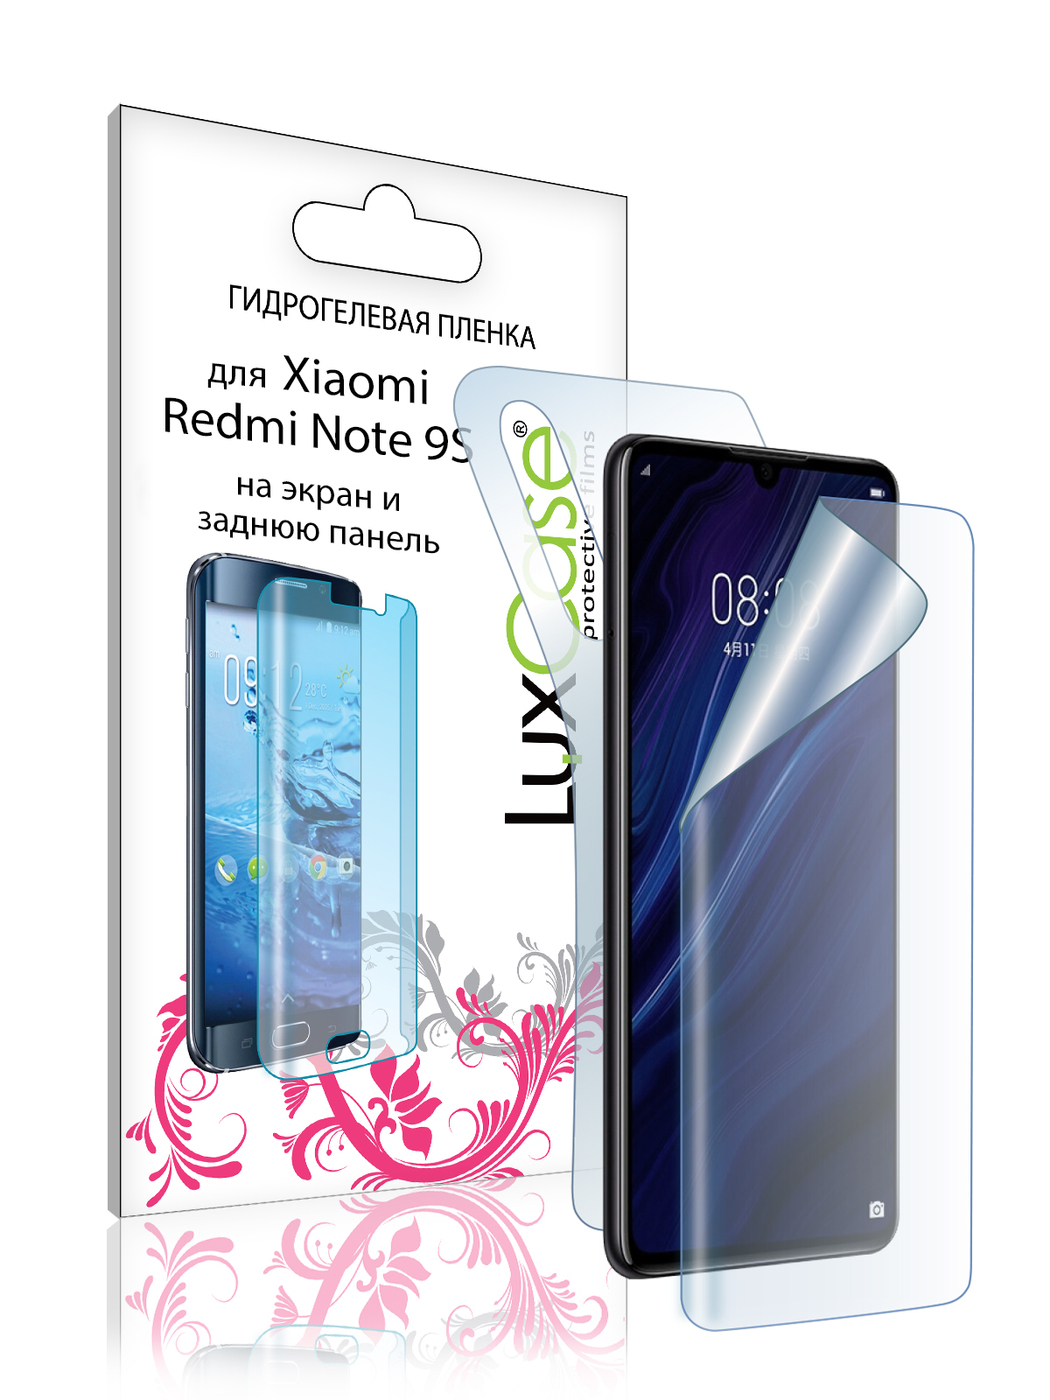 Пленка гидрогелевая LuxCase для Xiaomi Redmi Note 9S 0.14mm Front and Back Transparent 86090 гидрогелевая пленка luxcase для xiaomi redmi note 9 0 14mm back transparent 86083